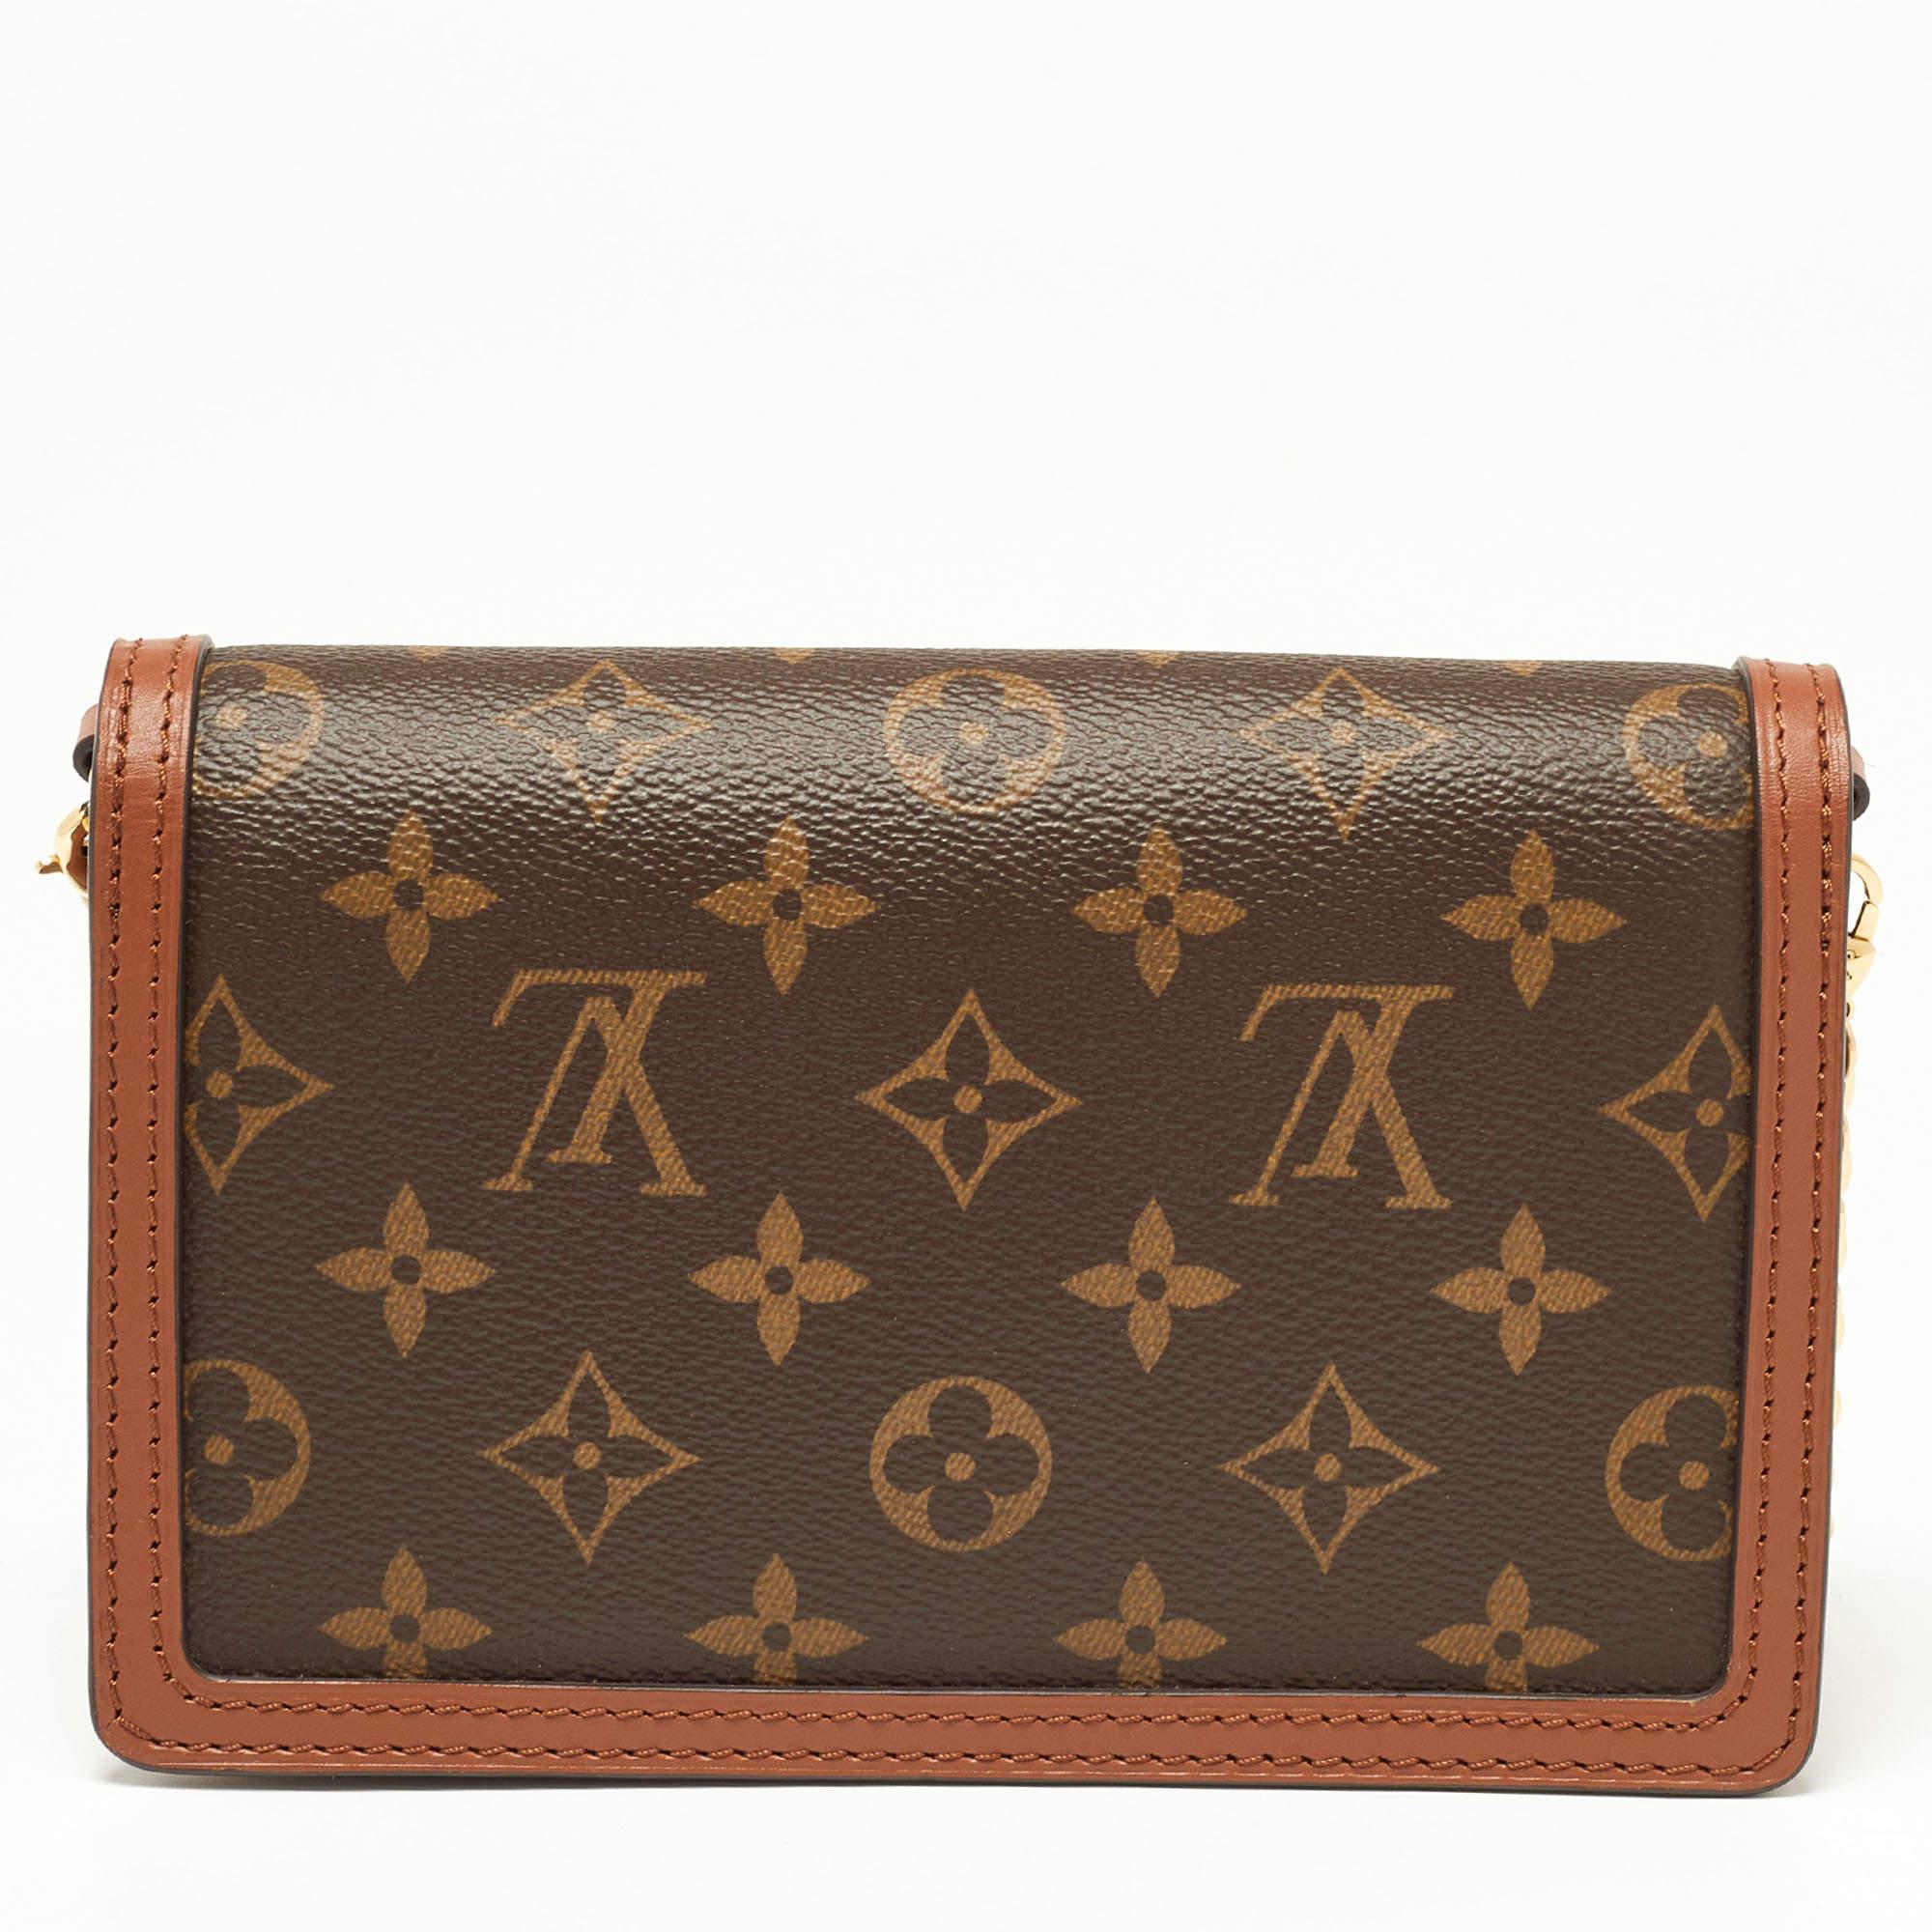 This stylish Dauphine Wallet on Chain carries the signature elements that Louis Vuitton is so popular for. Crafted in France, it is made from the brand's Monogram Reverse canvas and carries gold-tone hardware details. It is finished with a